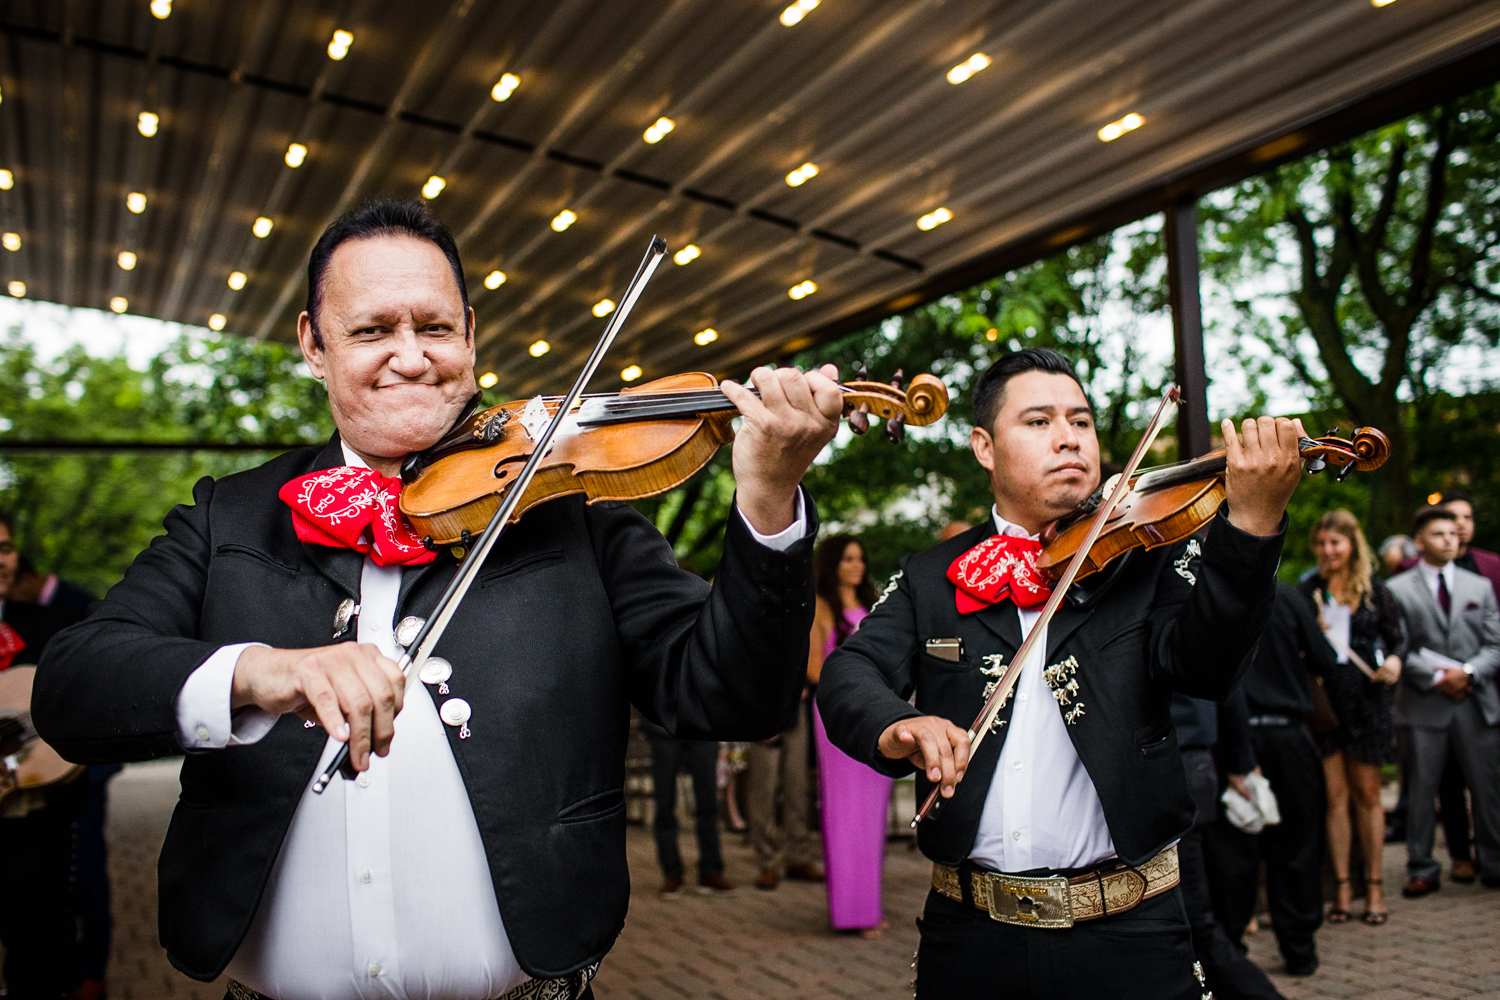 Members of a mariachi band play during a Gallery Marchetti wedding.